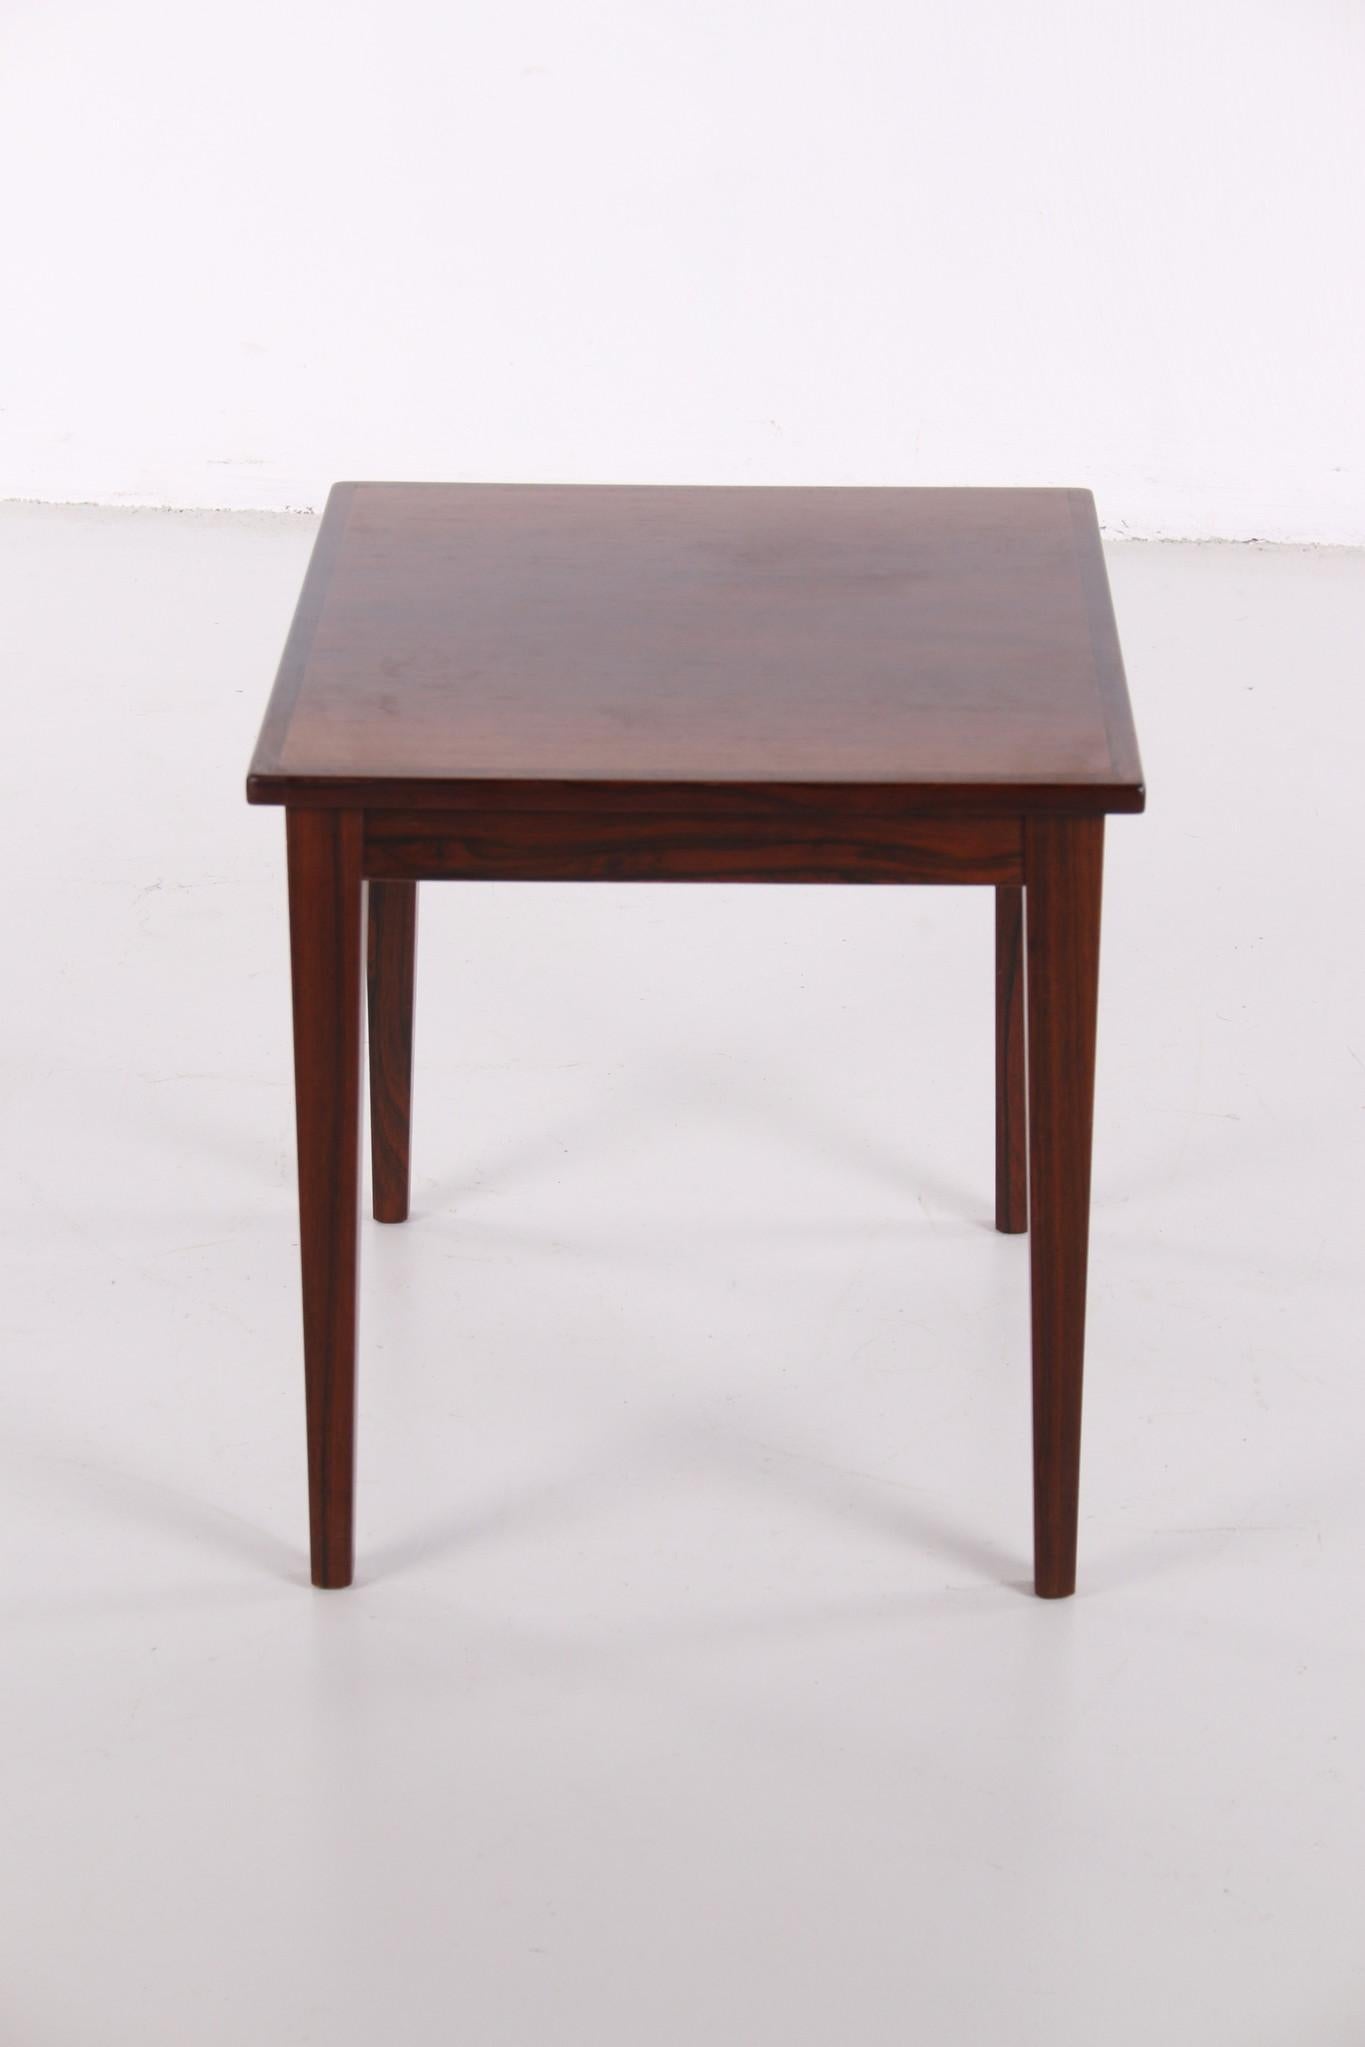 Black wood Plant Table or Side Table, 1960s For Sale 1